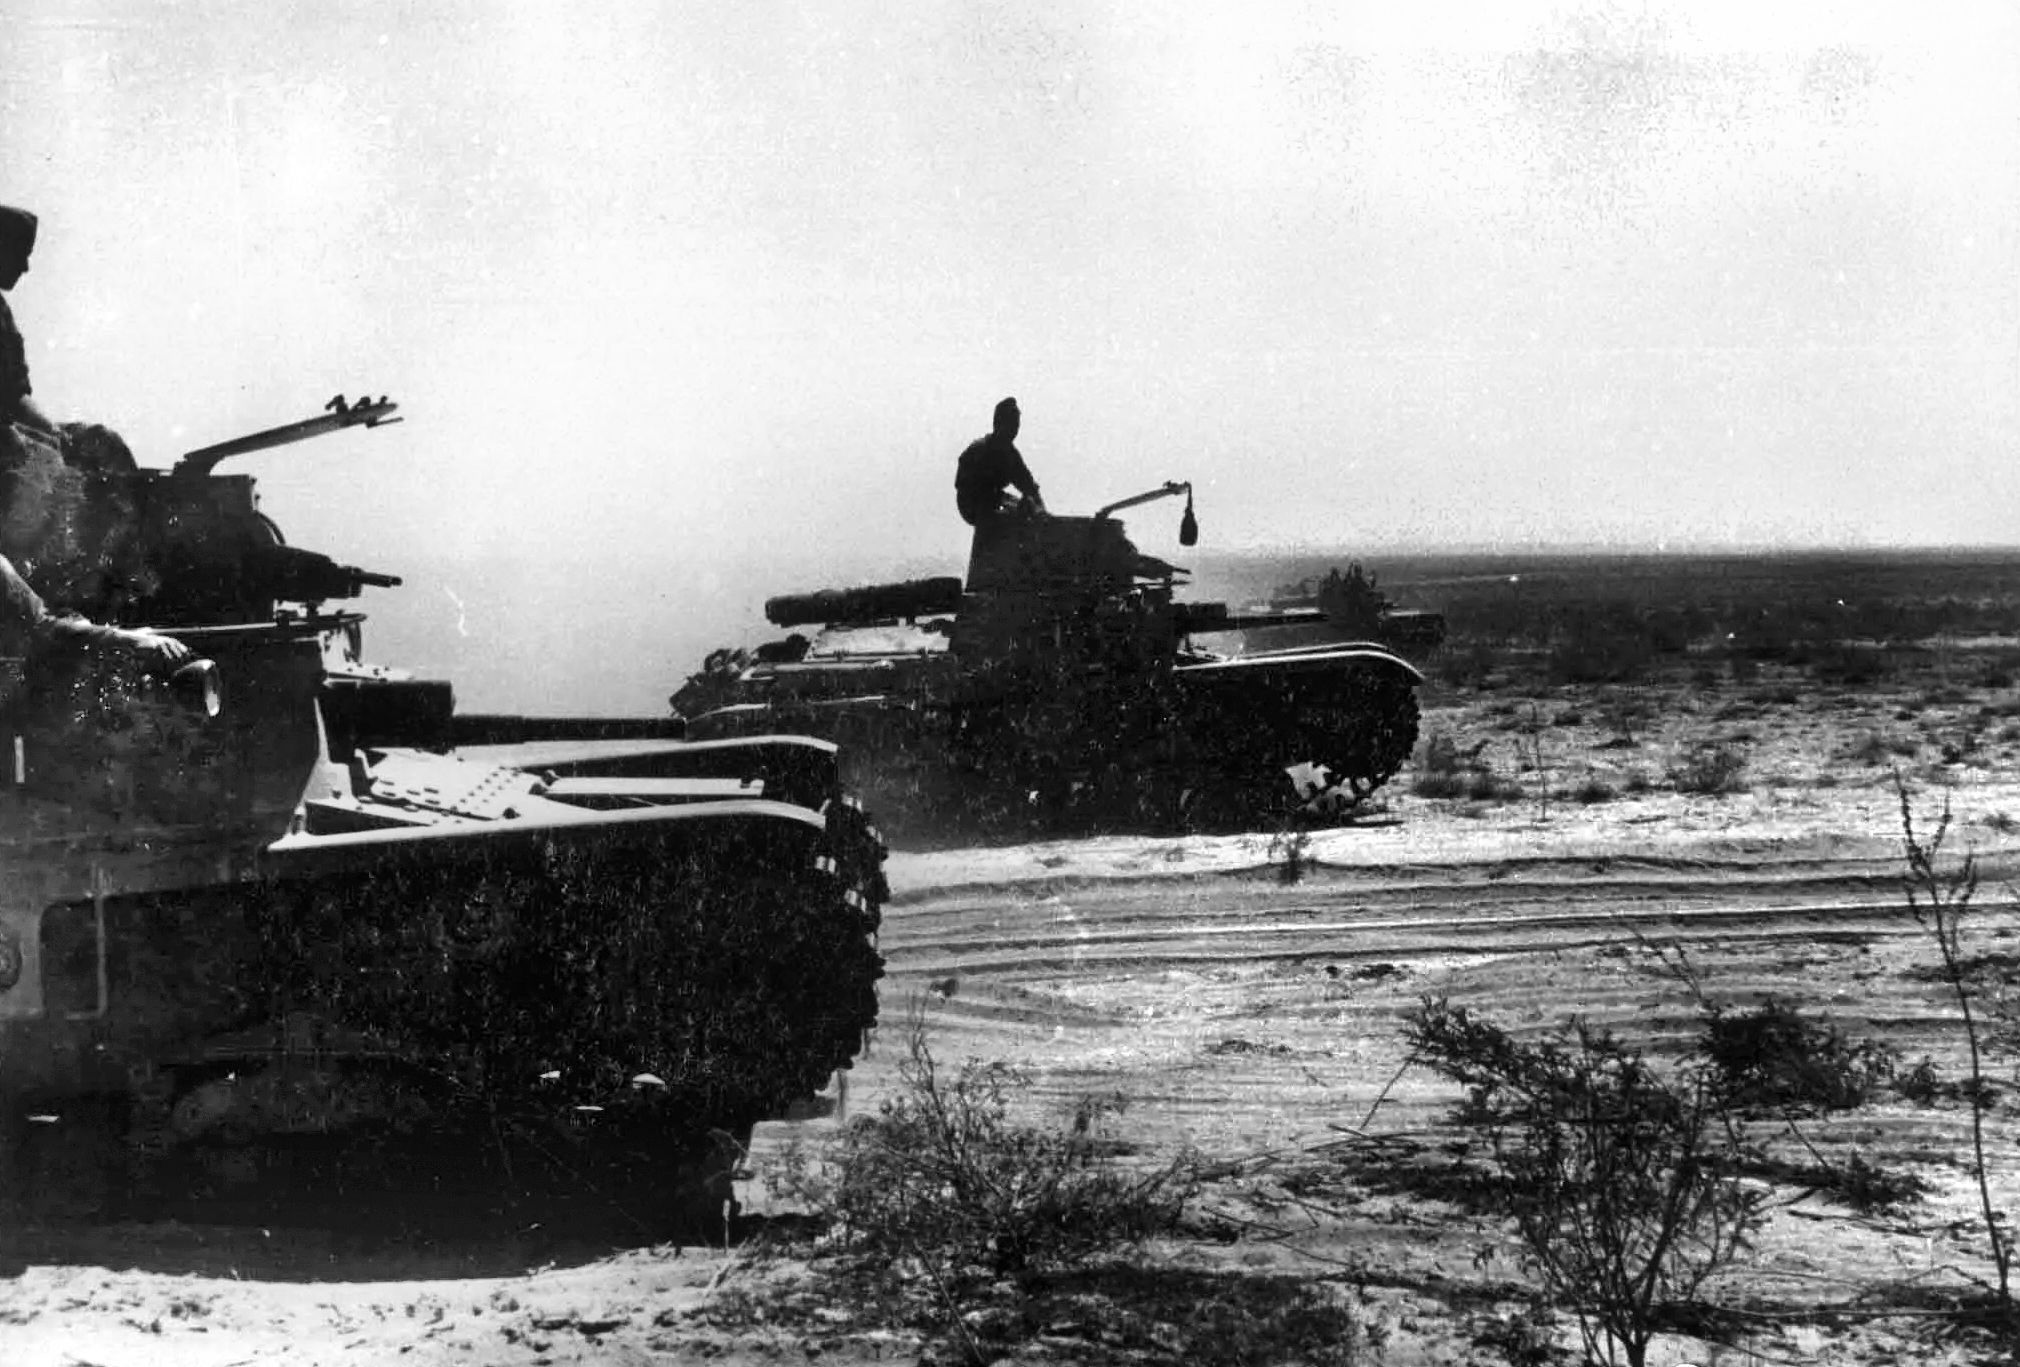 Italian tanks rumble across the desert floor as they approach Sidi Barrani during the desert offensive of 1940 against the British. The offensive, however, was roughly handled by a much smaller British force, and General Wavell authorized Operation Compass, a counteroffensive that led to disaster for the Italians and British victories at Sidi Barrani, Bardia, Tobruk, and Bed Fomm.